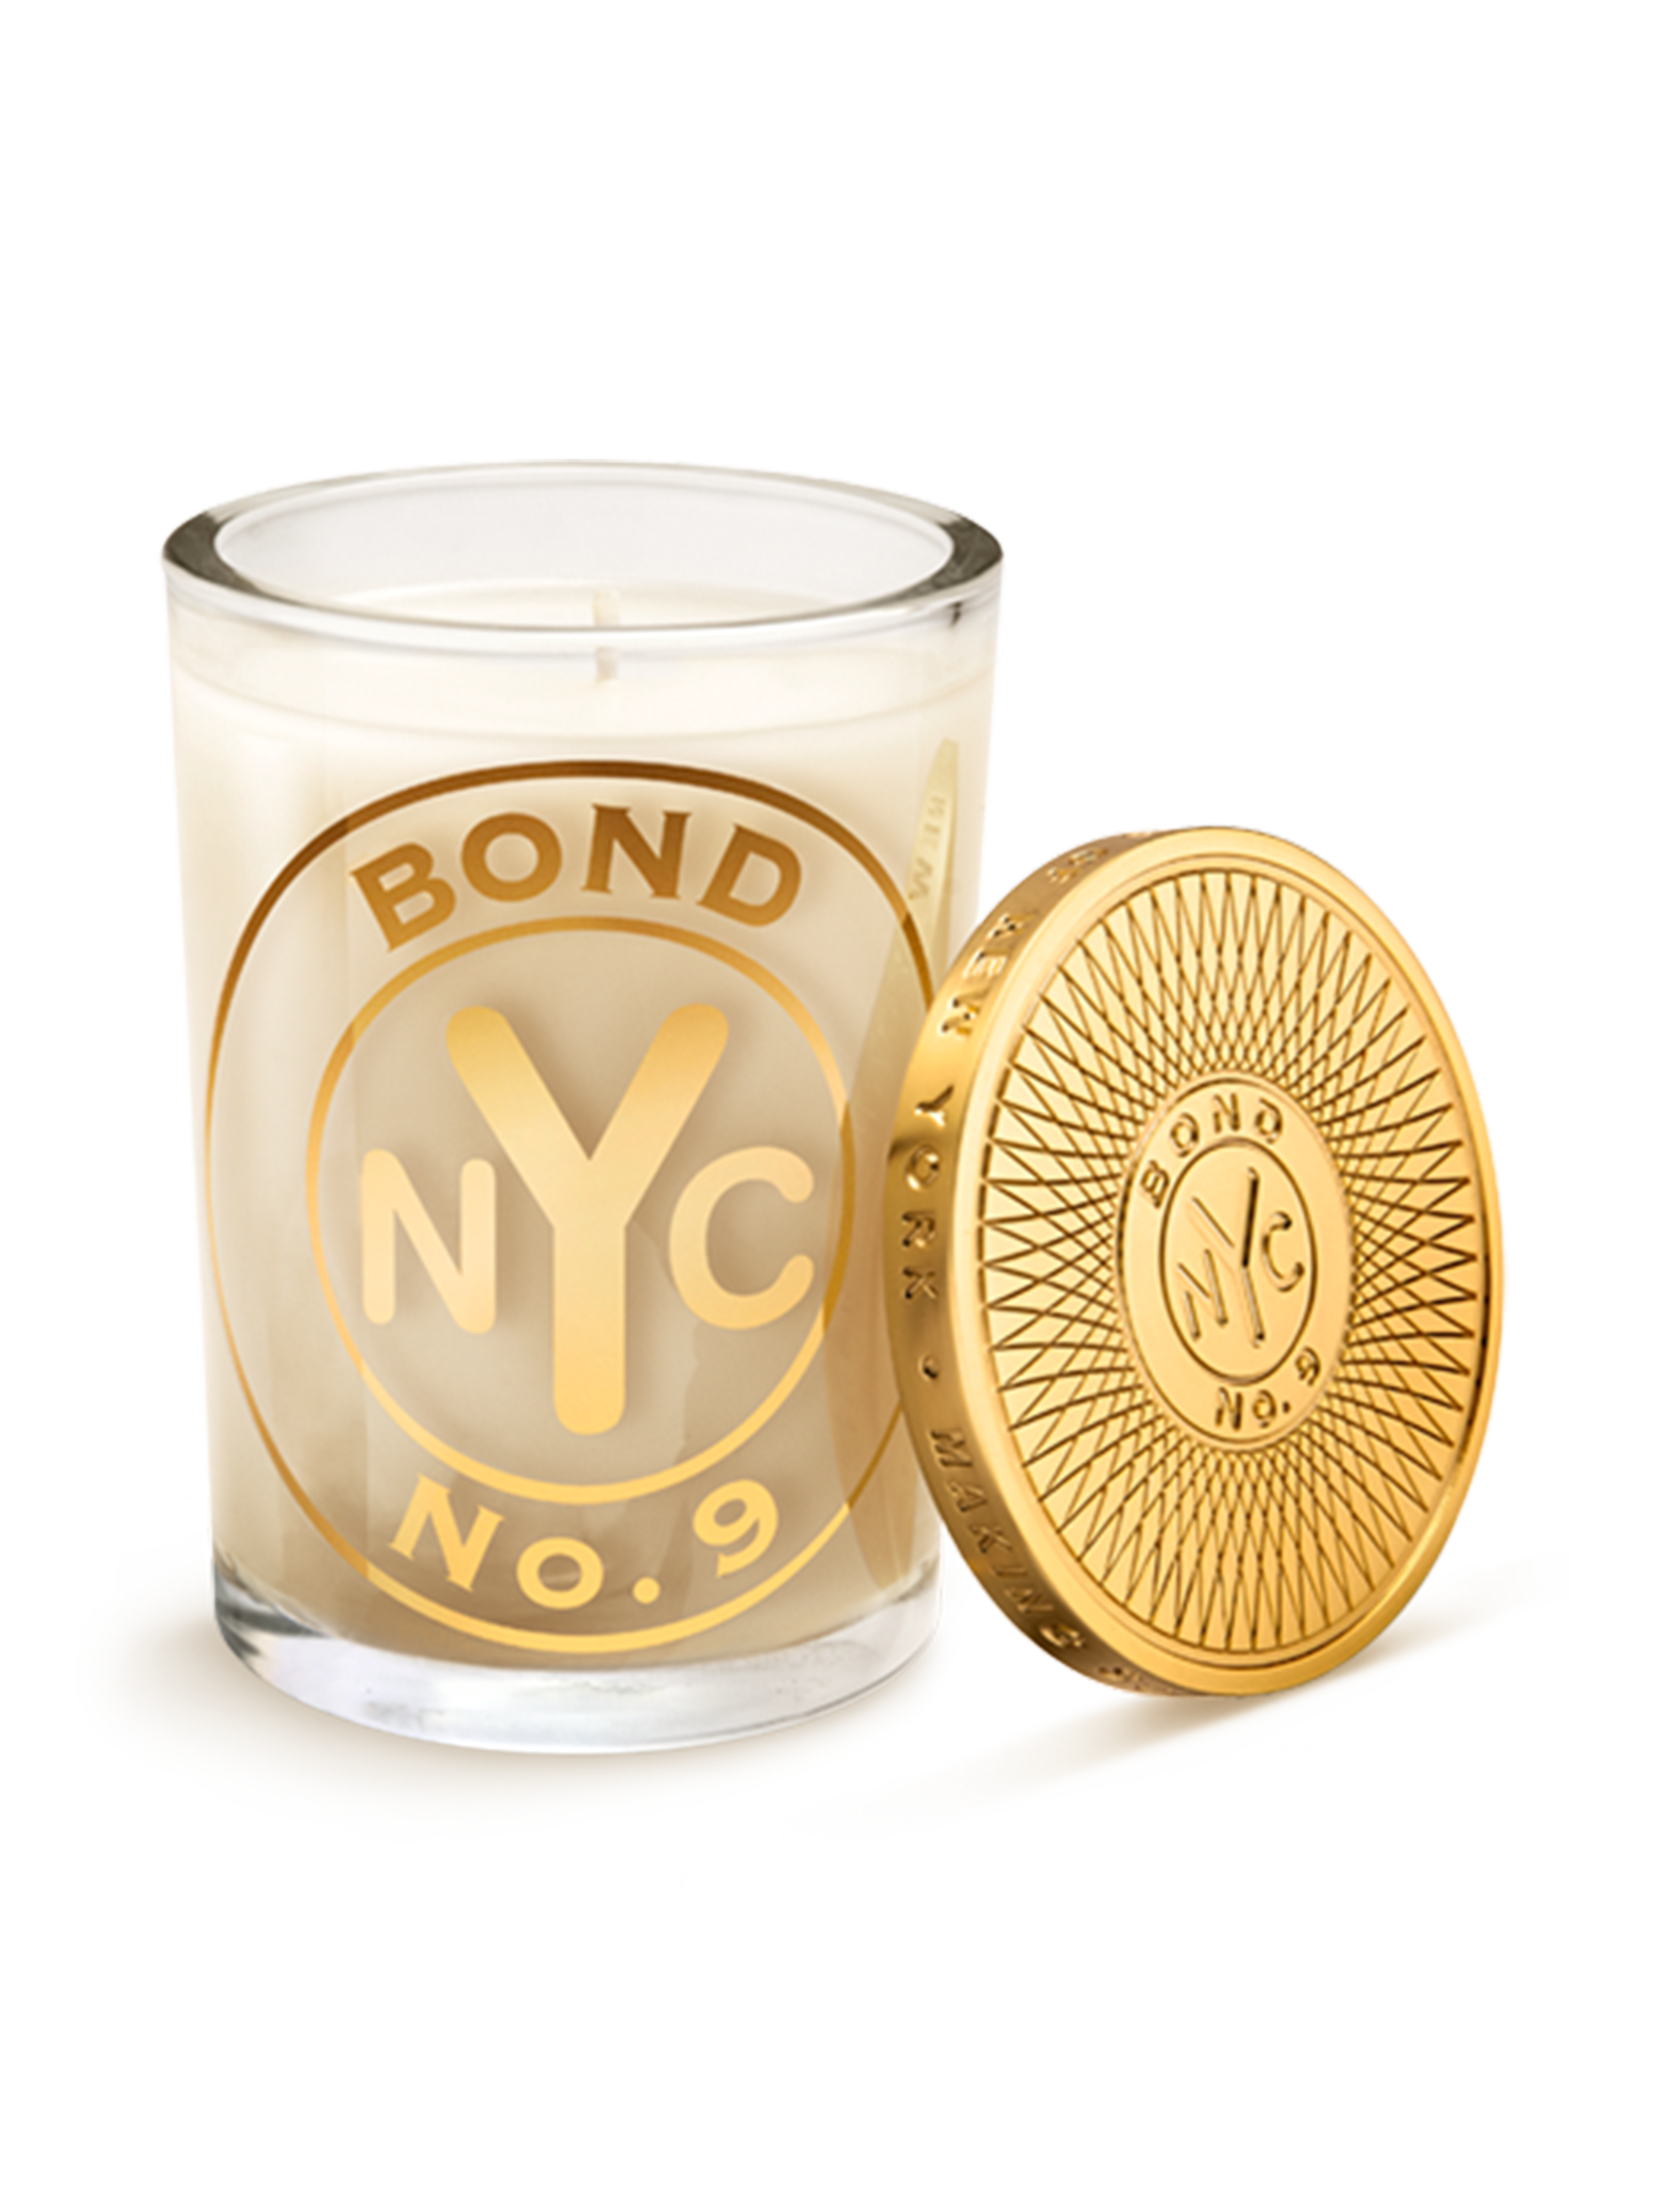 Scented Candle Tester 180g 6.4 oz BOND No 9 NYC QUEENS 